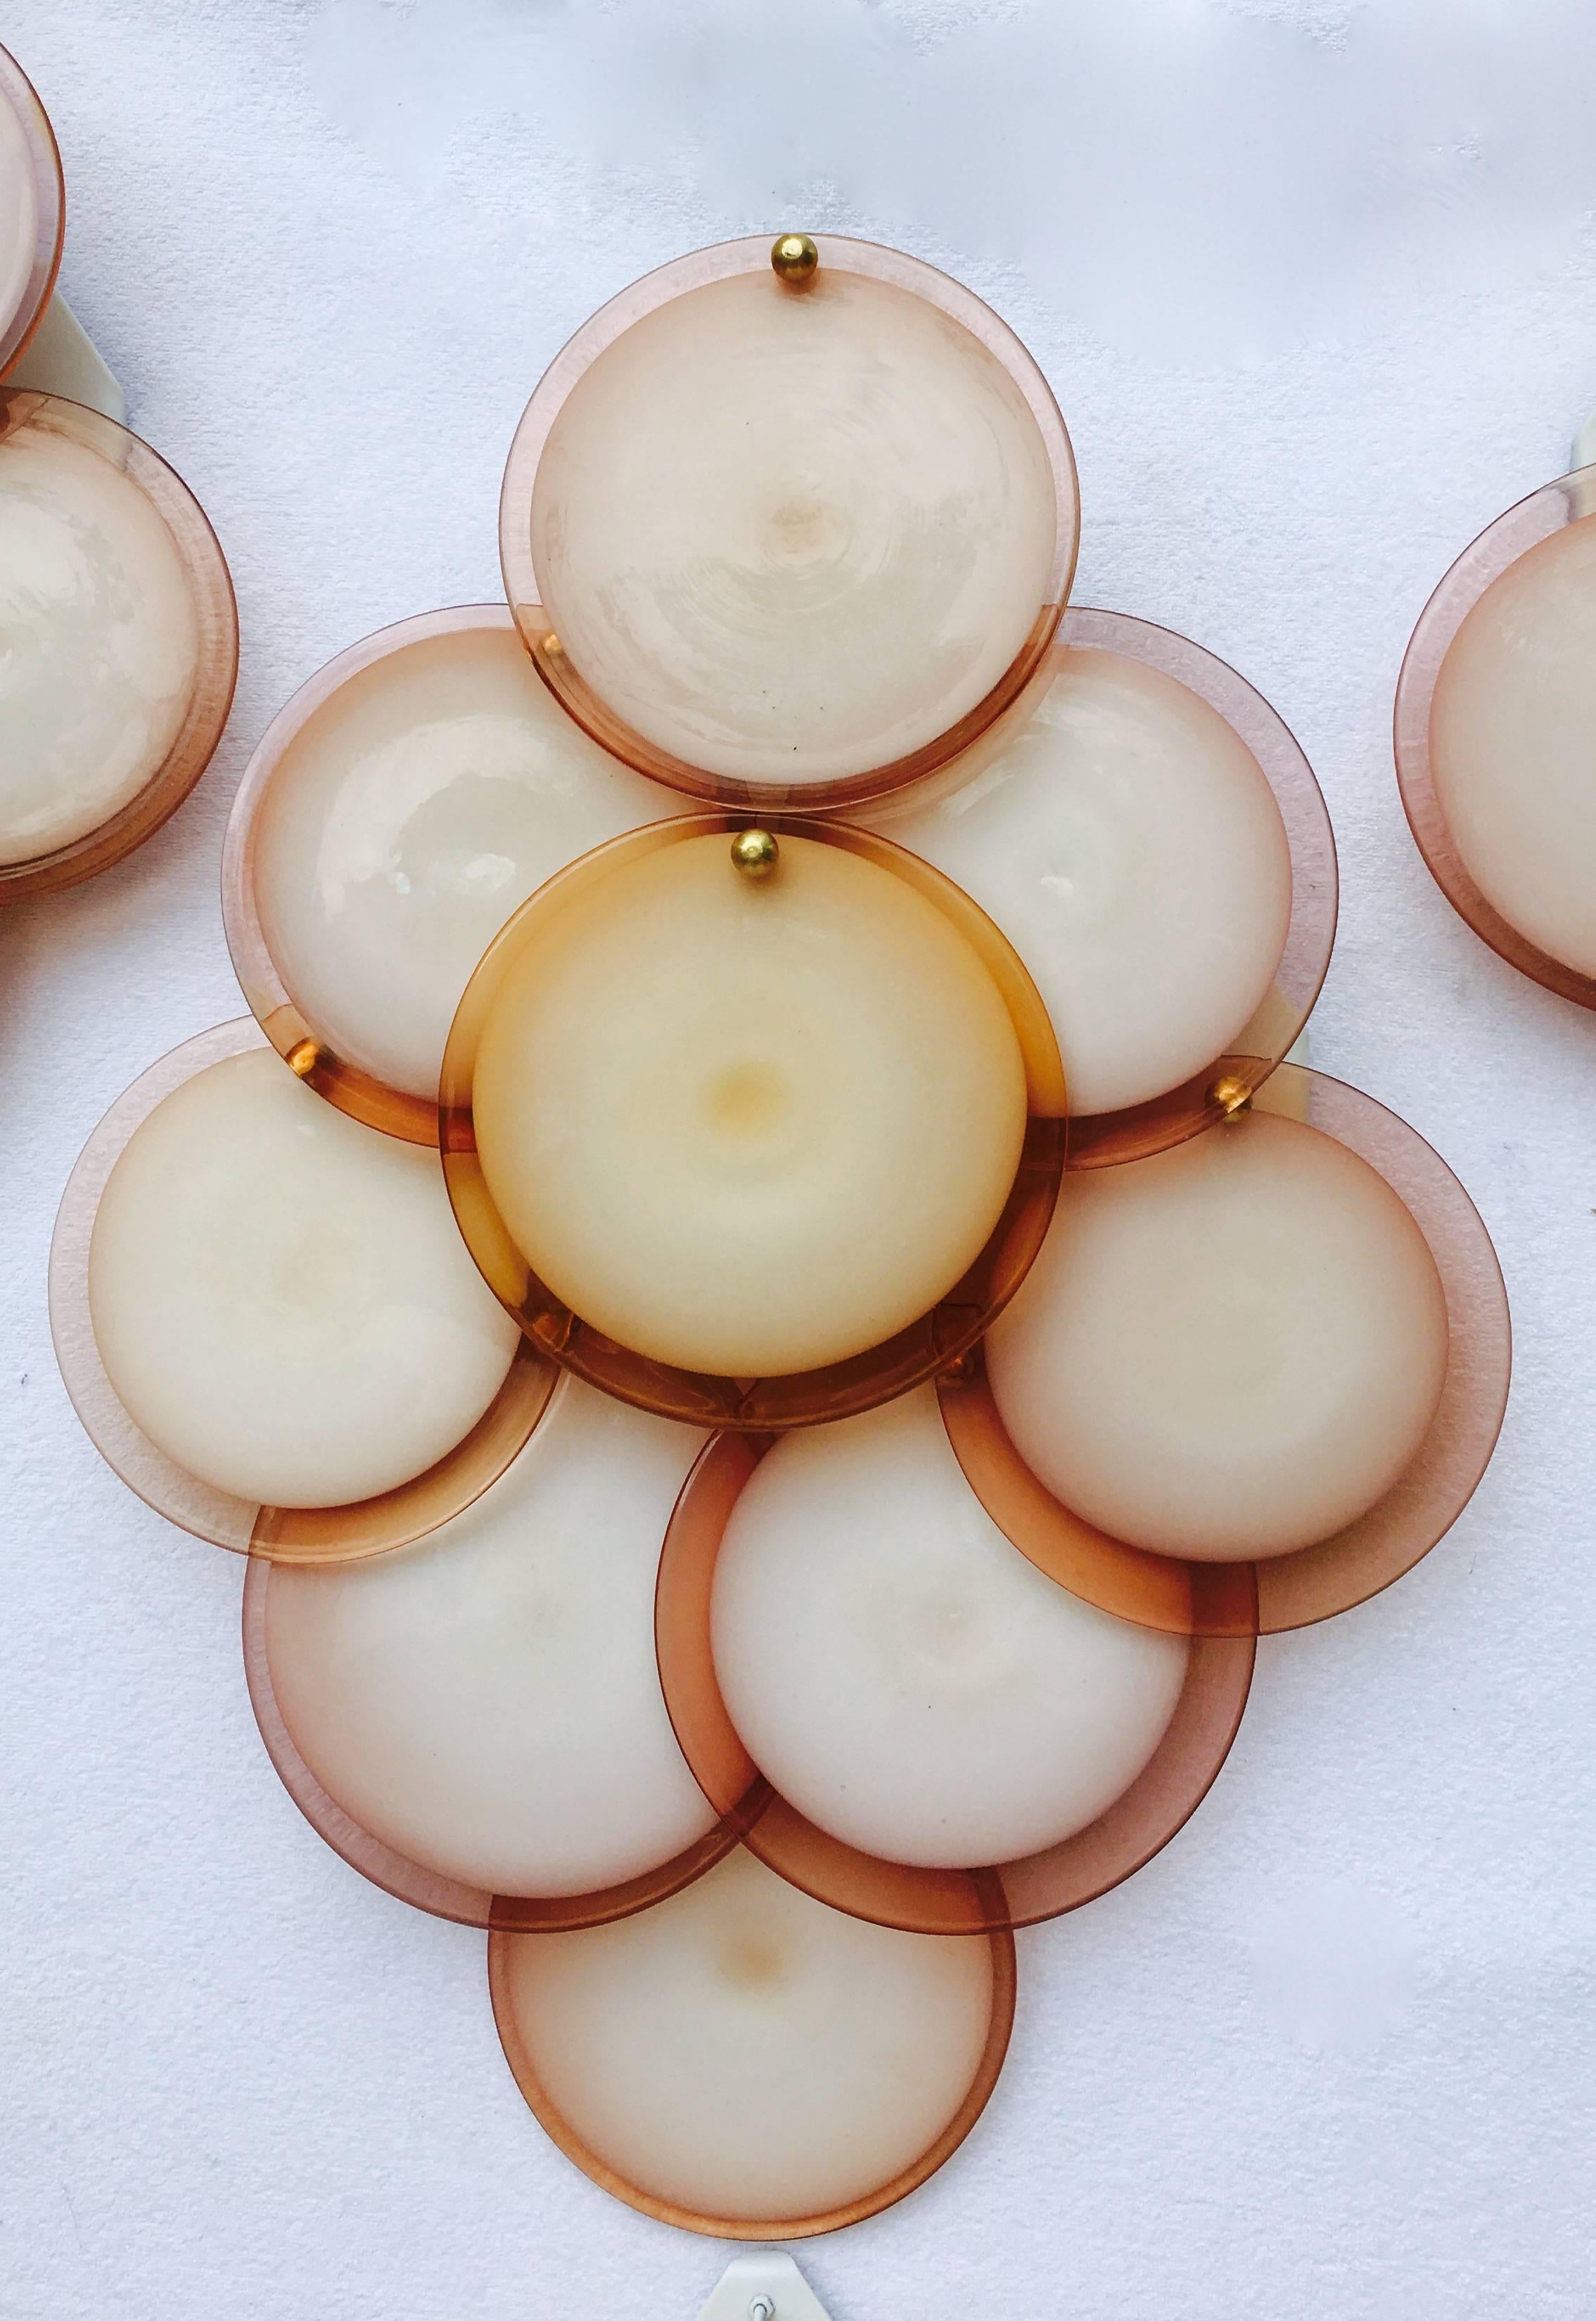 This set of large wall lights has nine overlapping rose opaque discs with smoked topaz perimeters mounted on a metal back panel with brass rods. Each disc has been handblown in Venice. The fixtures accommodate two bulbs each and are in great working